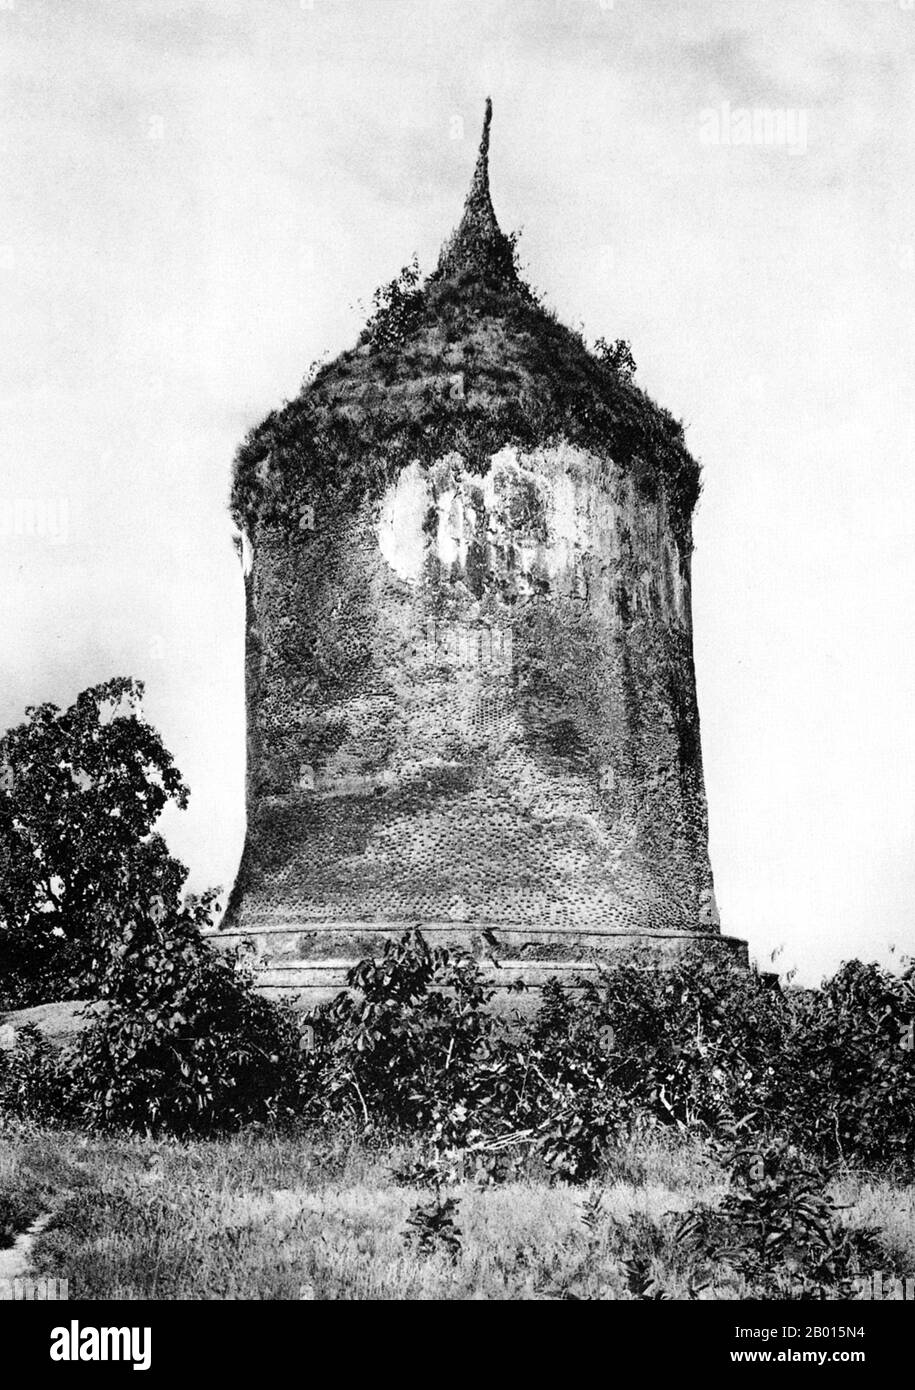 Burma/Myanmar: Bobogi Pagoda, near Prome, lower Burma, c. 1920s.  Legend attributes the first Buddhist doctrine in Burma to 228 BCE when Sohn Uttar Sthavira, one of the royal monks to Emperor Ashoka the Great of India, came to the country with other monks and sacred texts. However, the era of Buddhism truly began in the 11th century after King Anawrahta of Pagan (Bagan) was converted to Theravada Buddhism. Today, 89% of the population of Burma is Theravada Buddhist.  Prome, renamed Pyay, is a town in Pegu (Bago) Division in lower Burma, located on the Irrawaddy (Ayeyarwady) River. Stock Photo